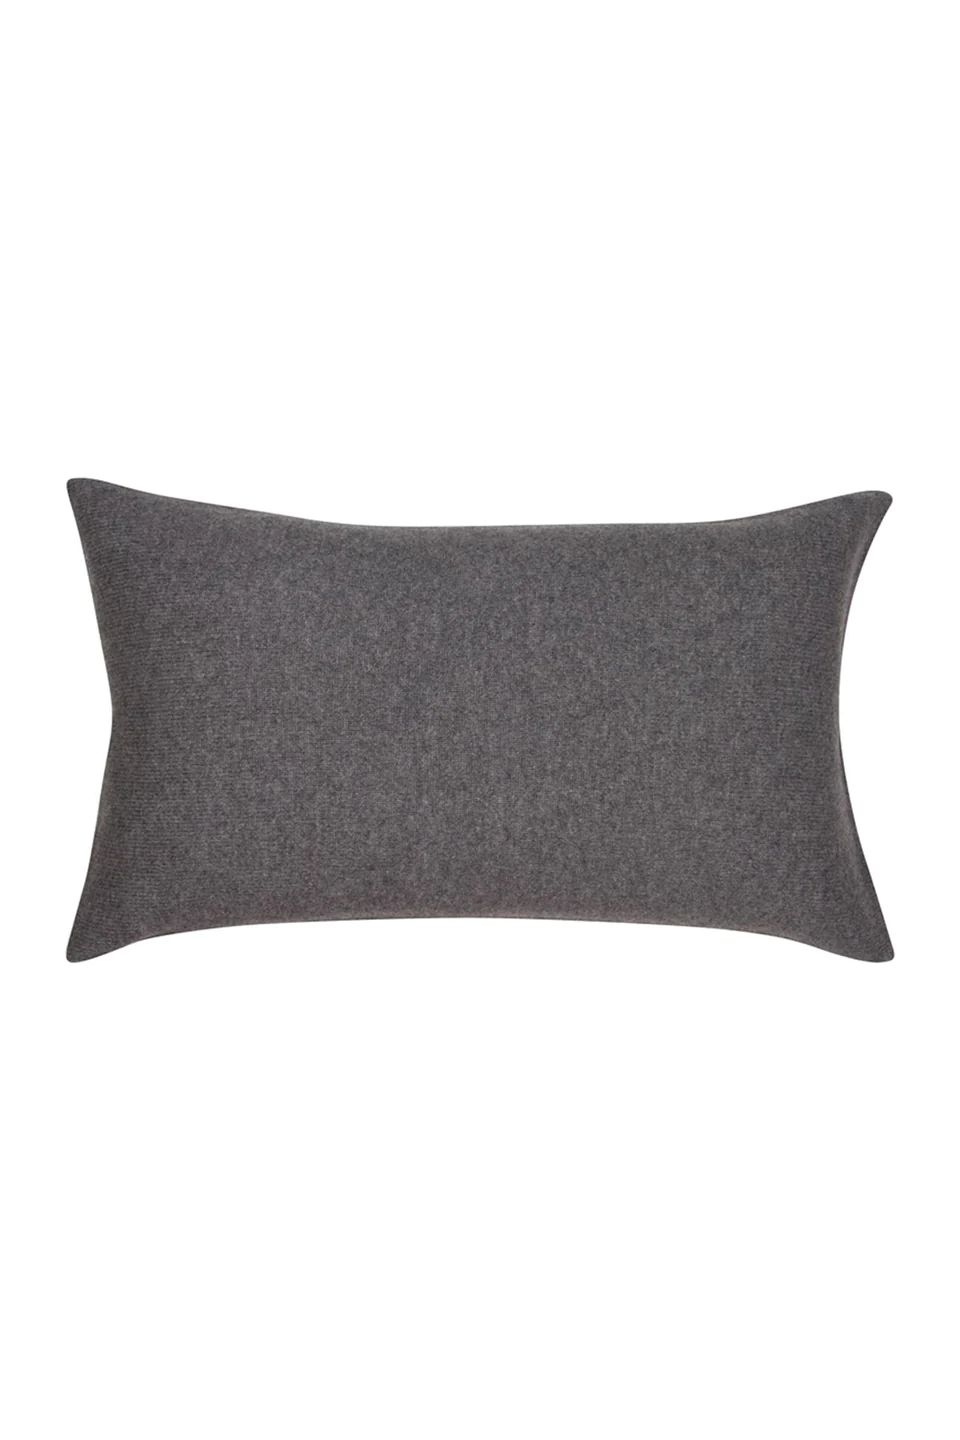 ELODIE PILLOW SHAM | NAKED CASHMERE